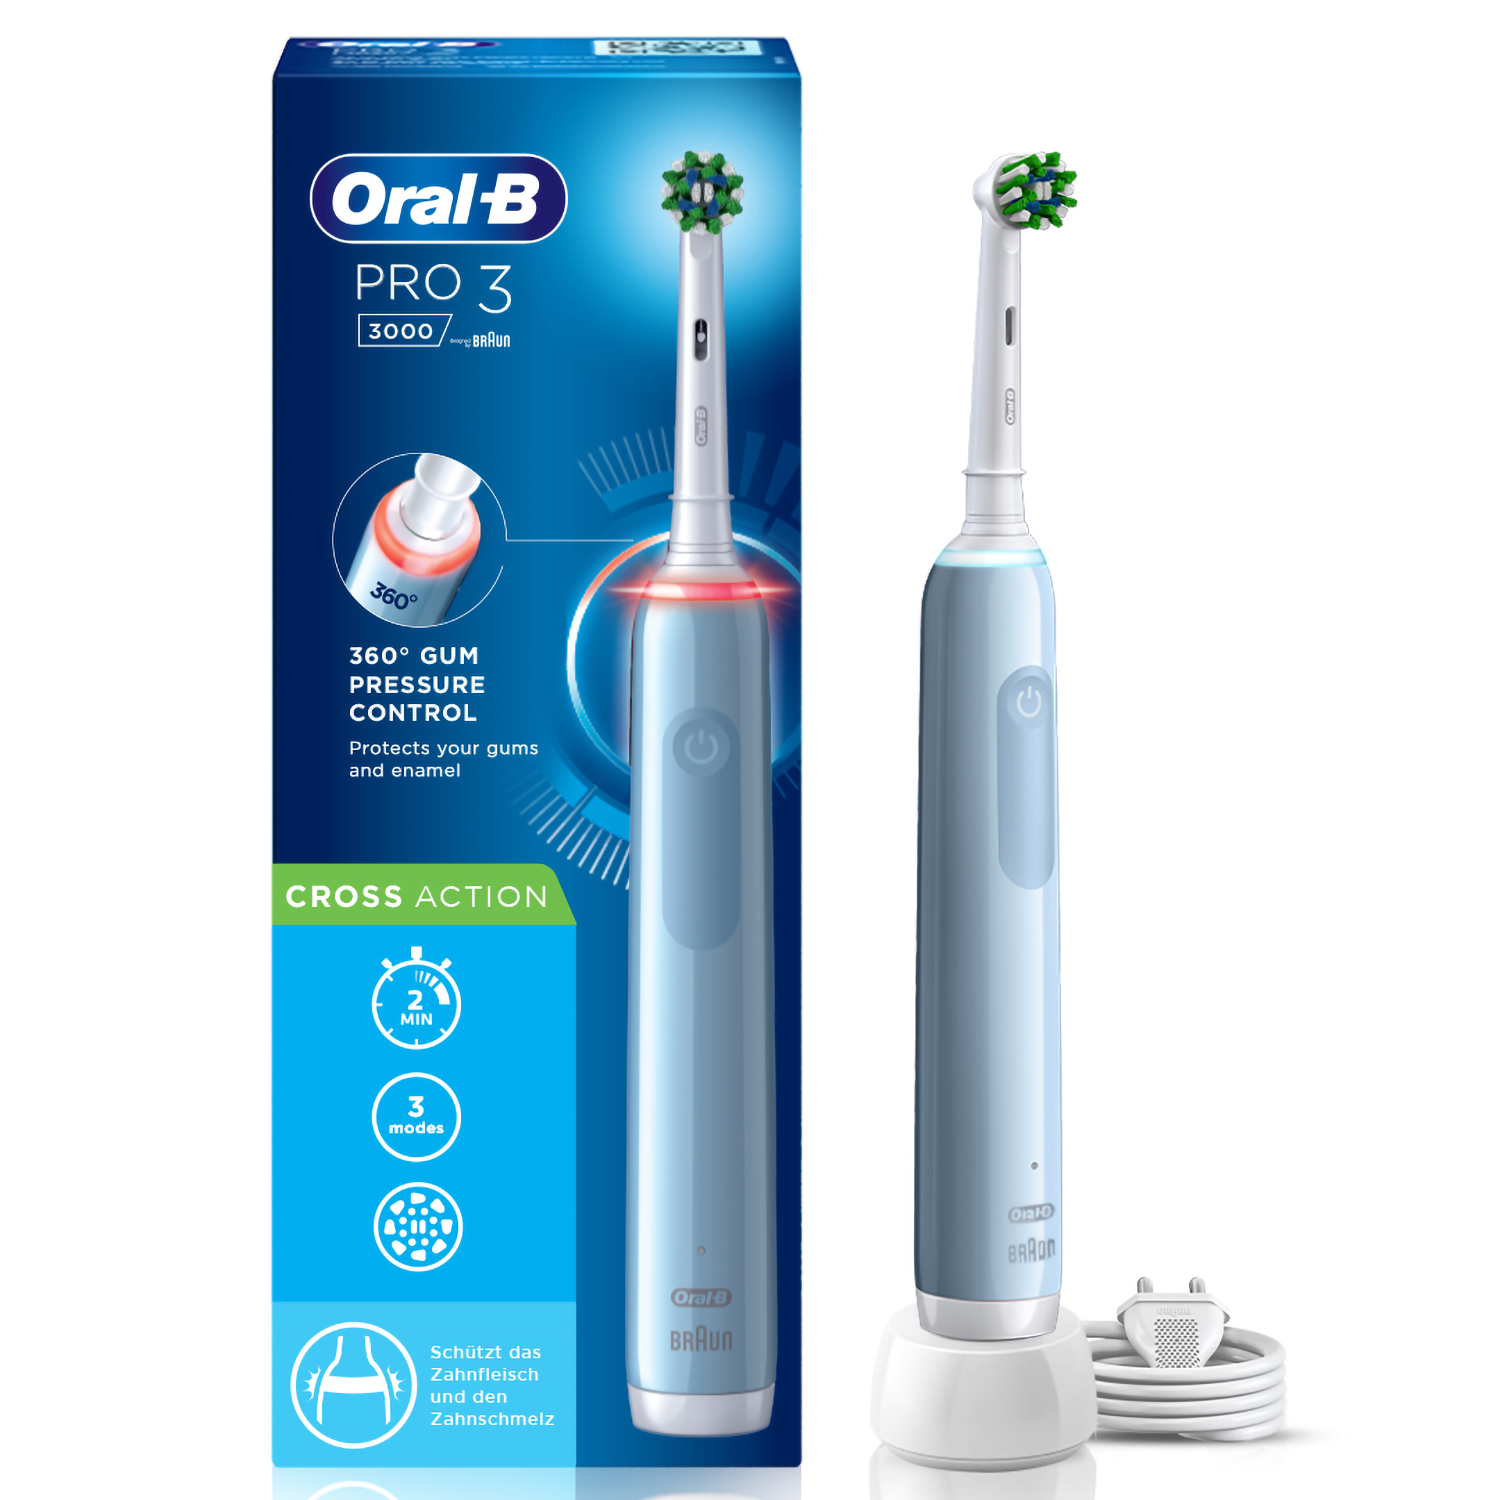 Oral B Pro 3 Electric Toothbrush, 3 modes with Triple pressure control, replaceable brush head included